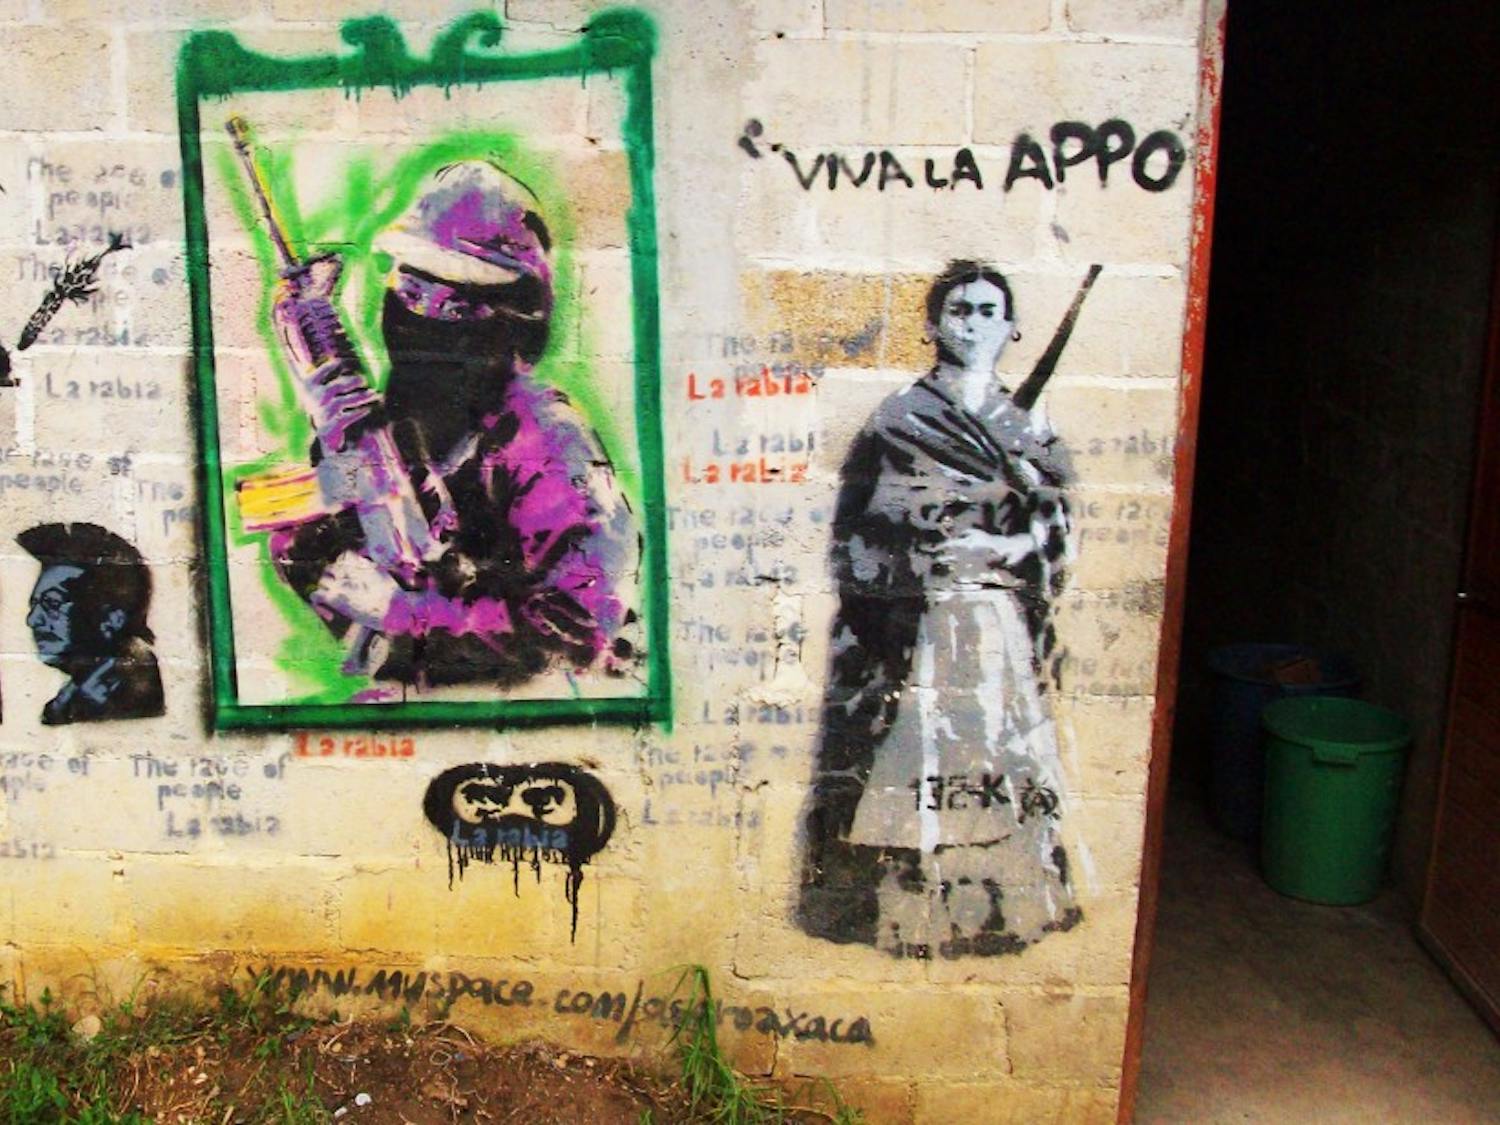 	Revolutionary graffiti is displayed on the wall of a student dormitory in Oventic, Chiapas.